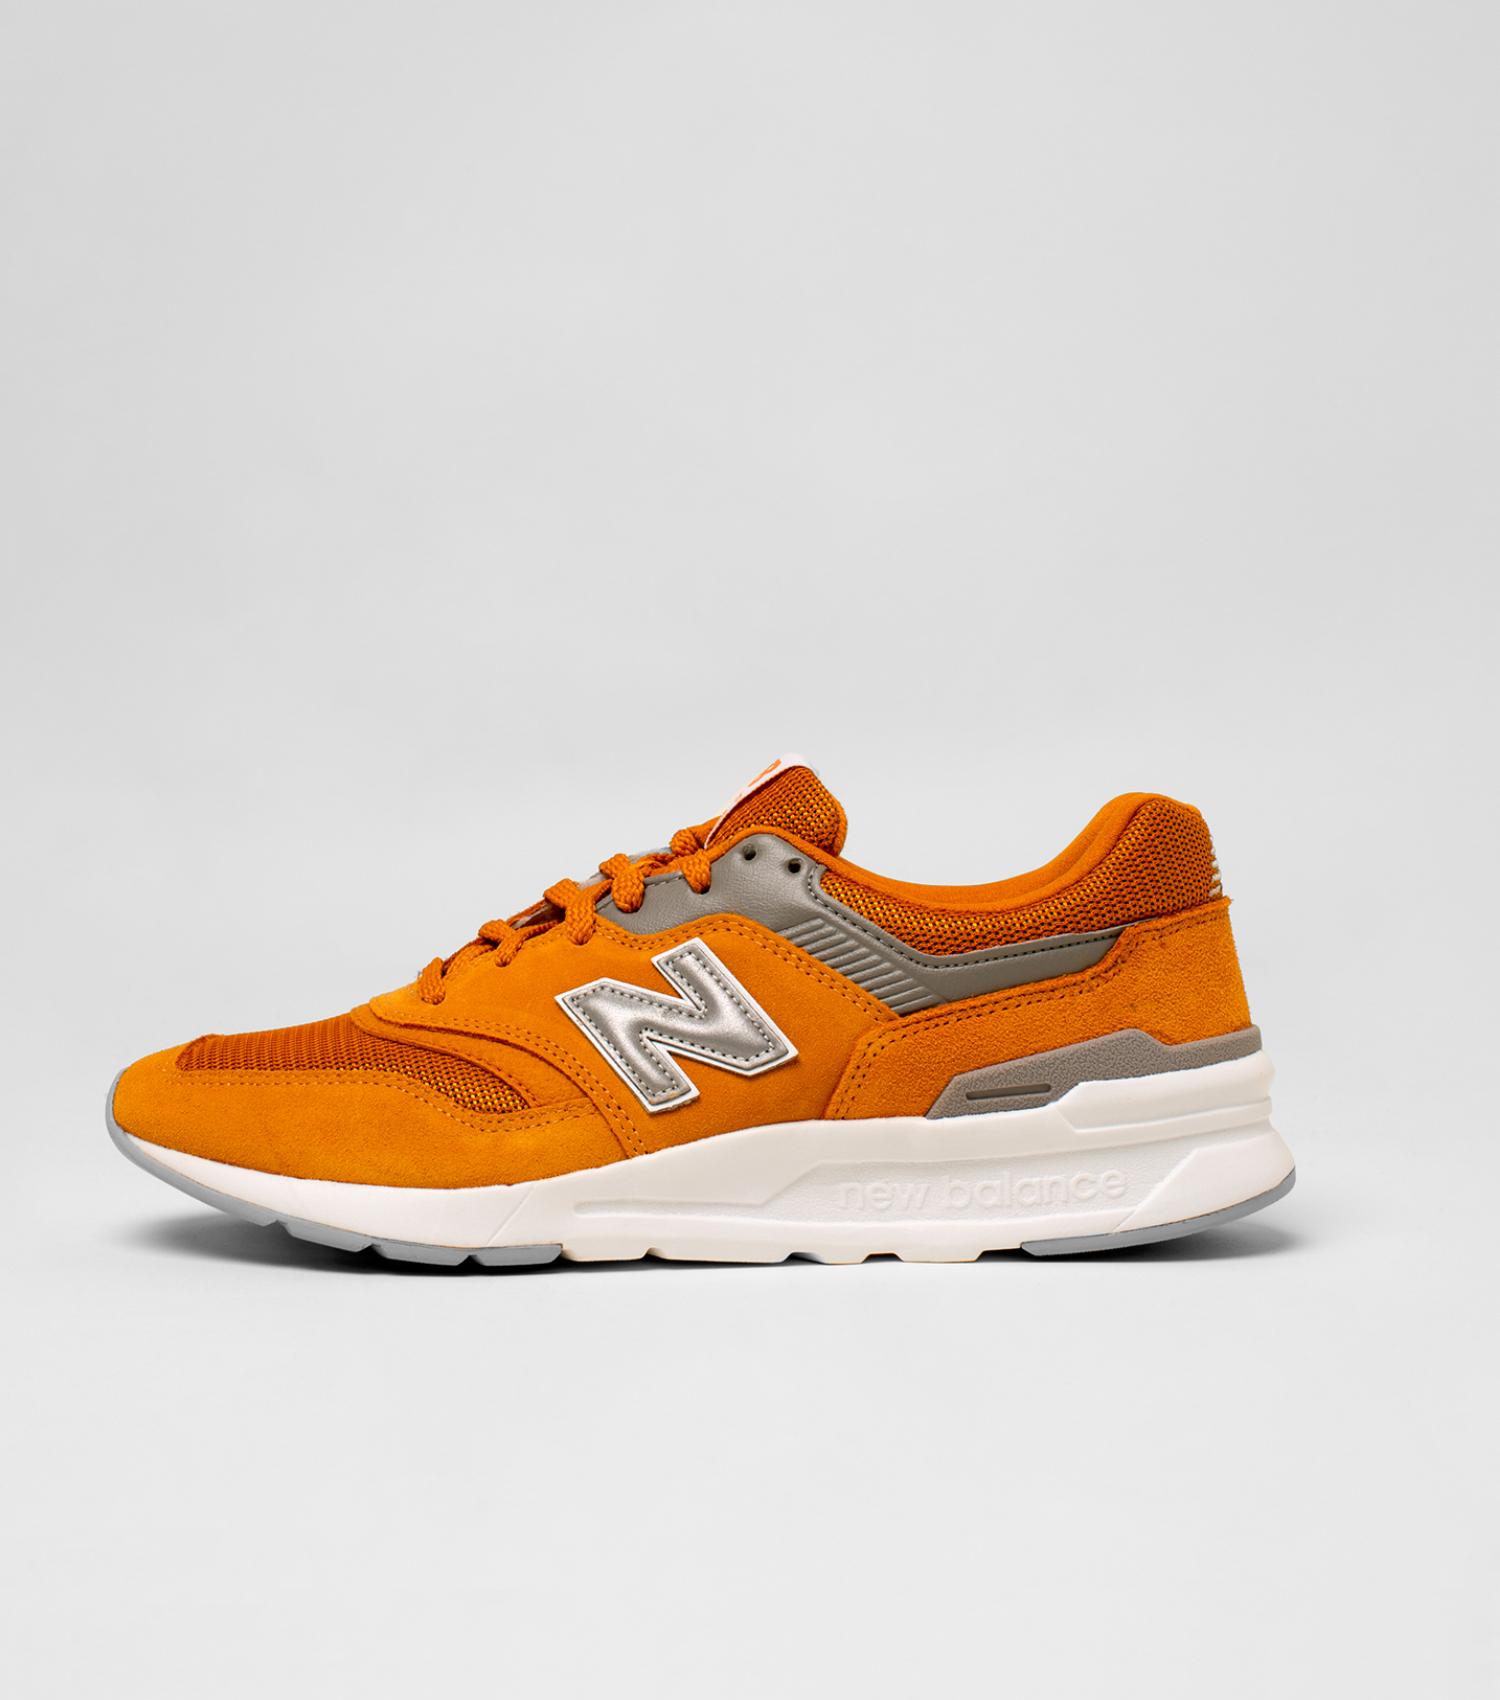 New Balance Spice Orange 997h Nb Sneakers for Men - Lyst